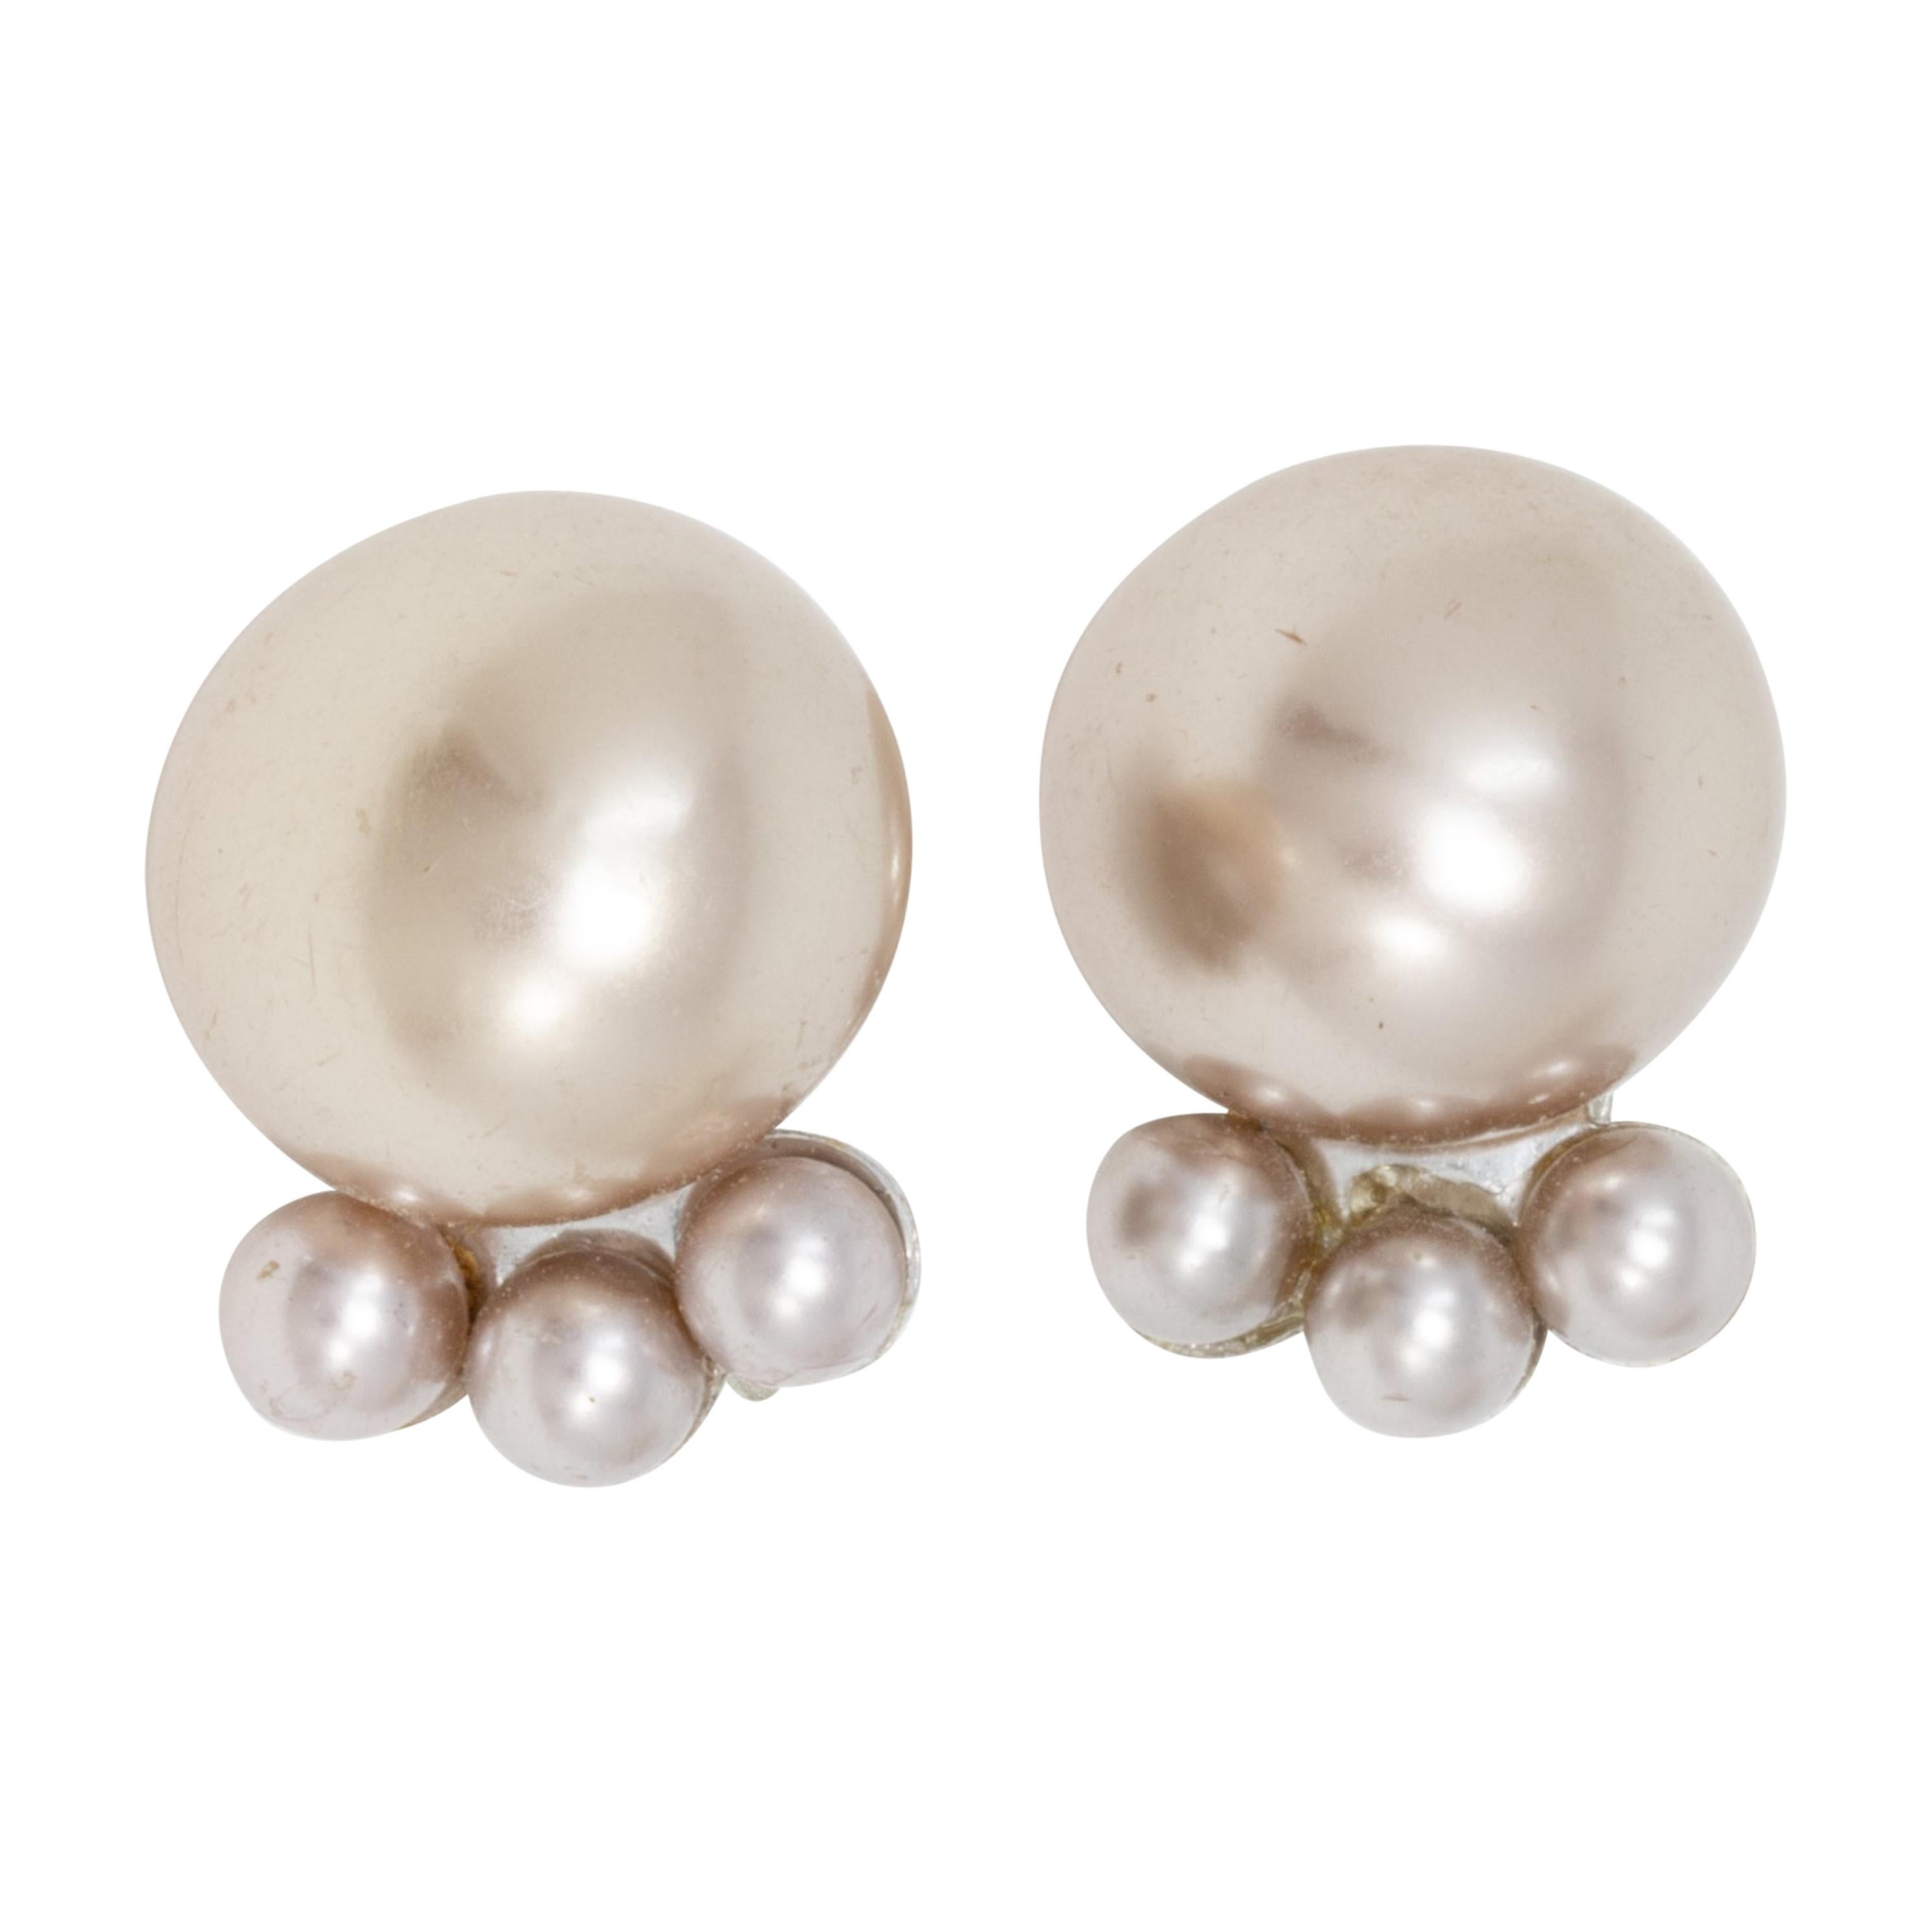 Retro Chunky Faux Pearl Crystal Clip on Earrings, Silver, Mid 1900s